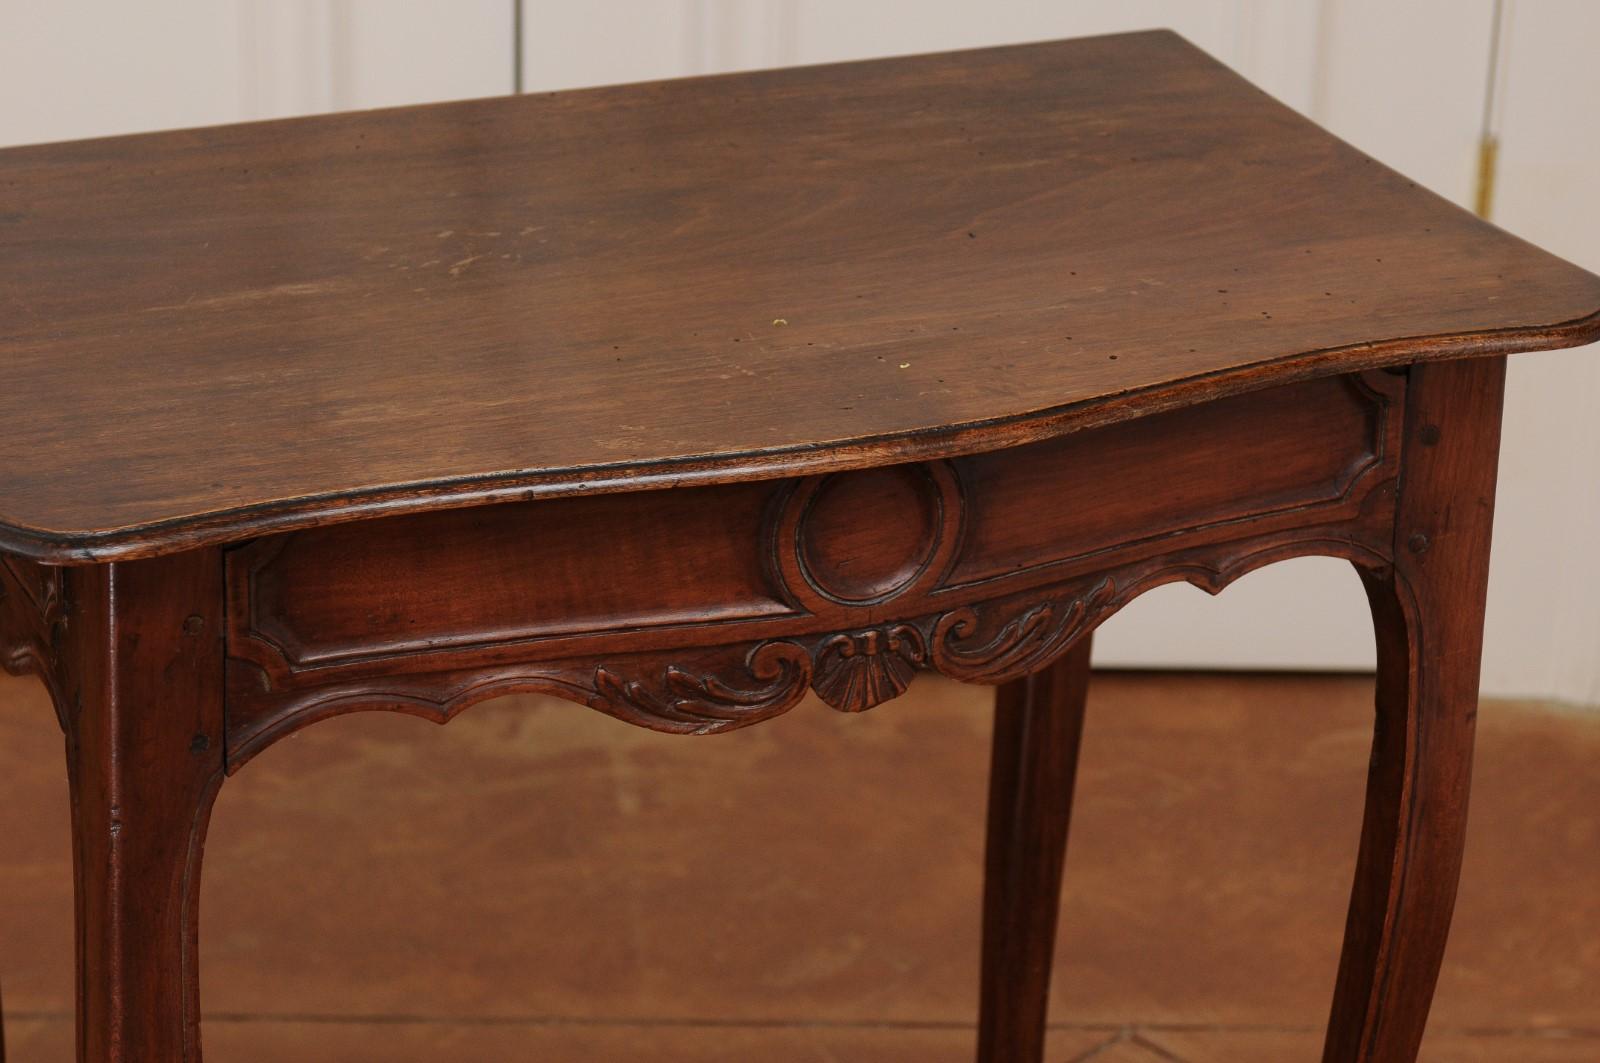 18th Century French 1790s Walnut Side Table with Side Drawer, Curving Legs and Carved Apron For Sale